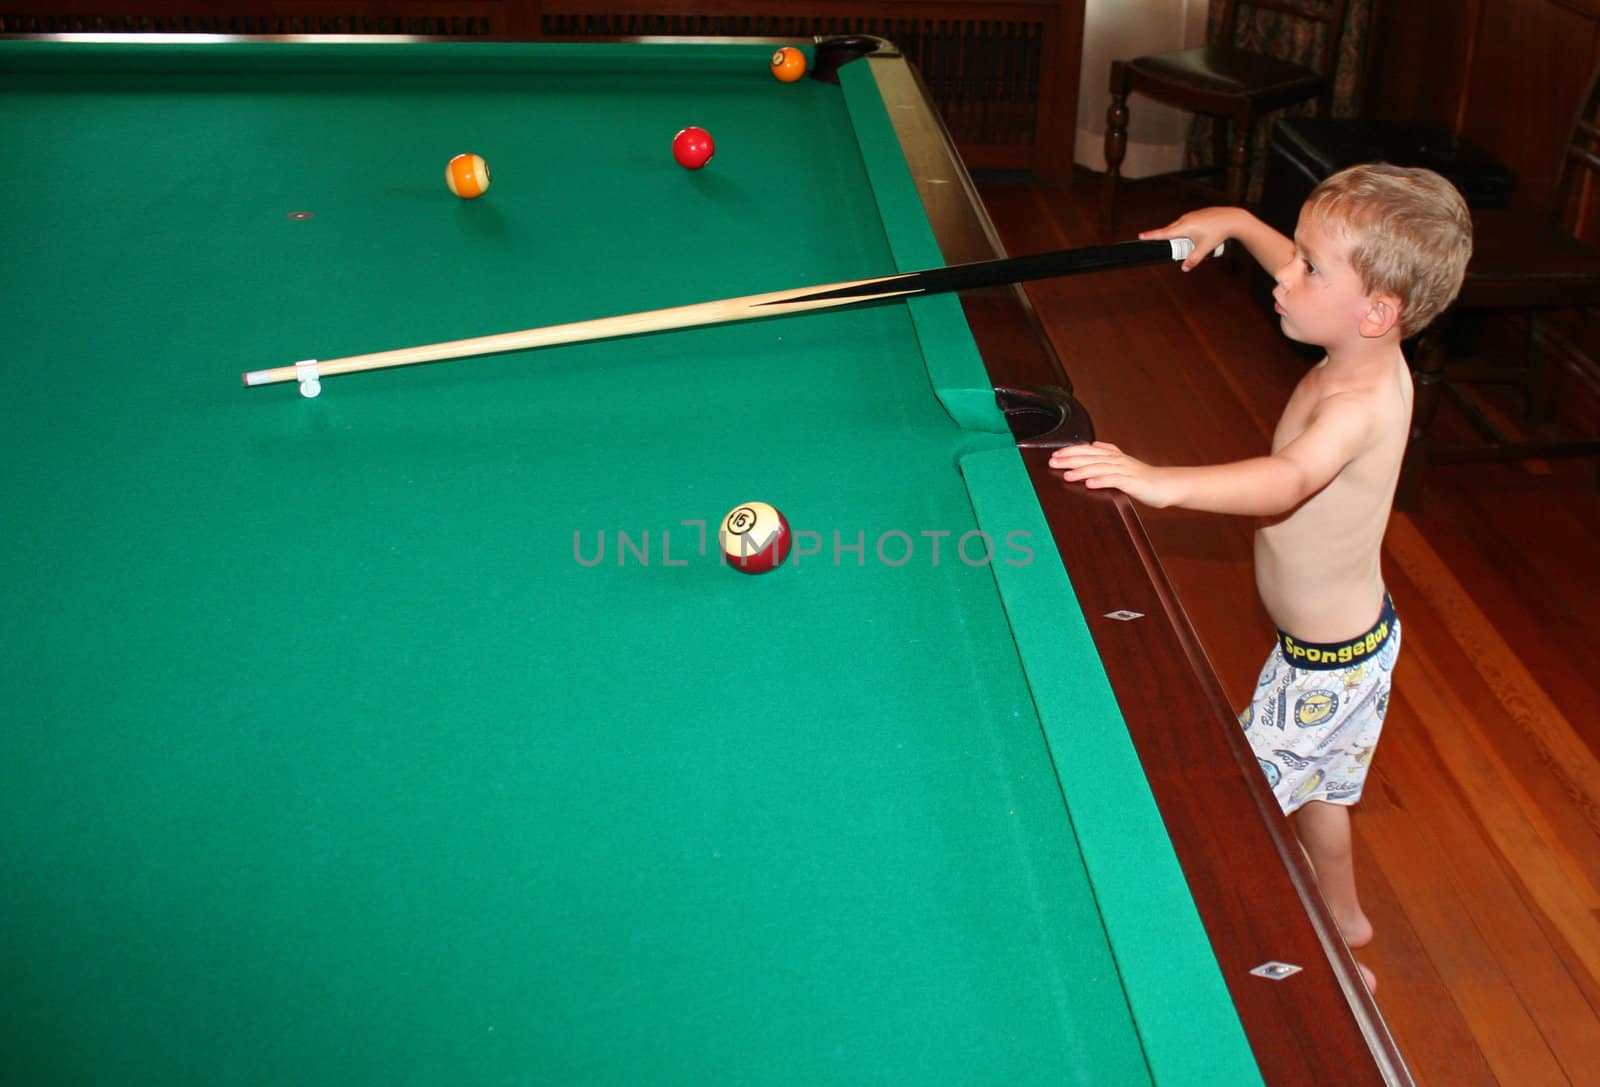 3 year old at pool table